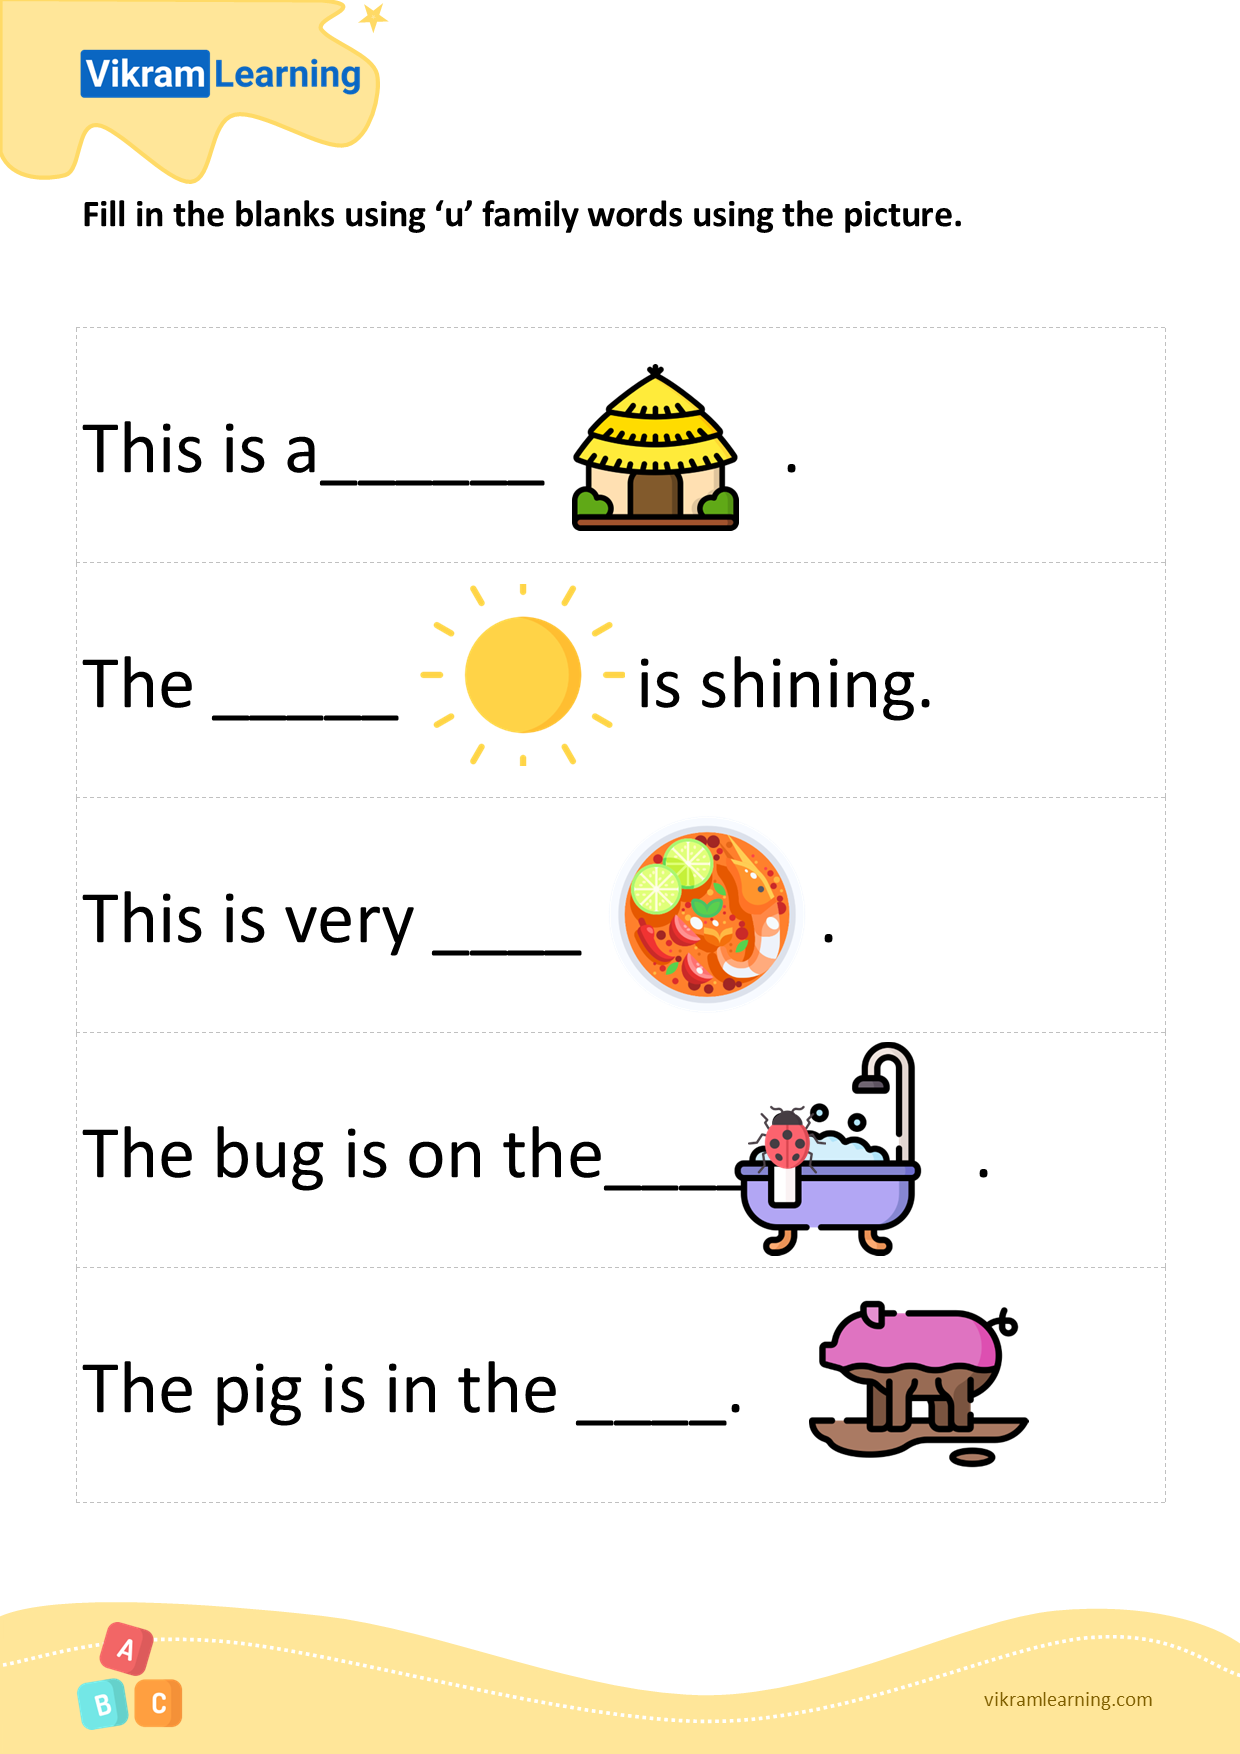 download-fill-in-the-blanks-using-u-family-words-using-the-picture-worksheets-vikramlearning